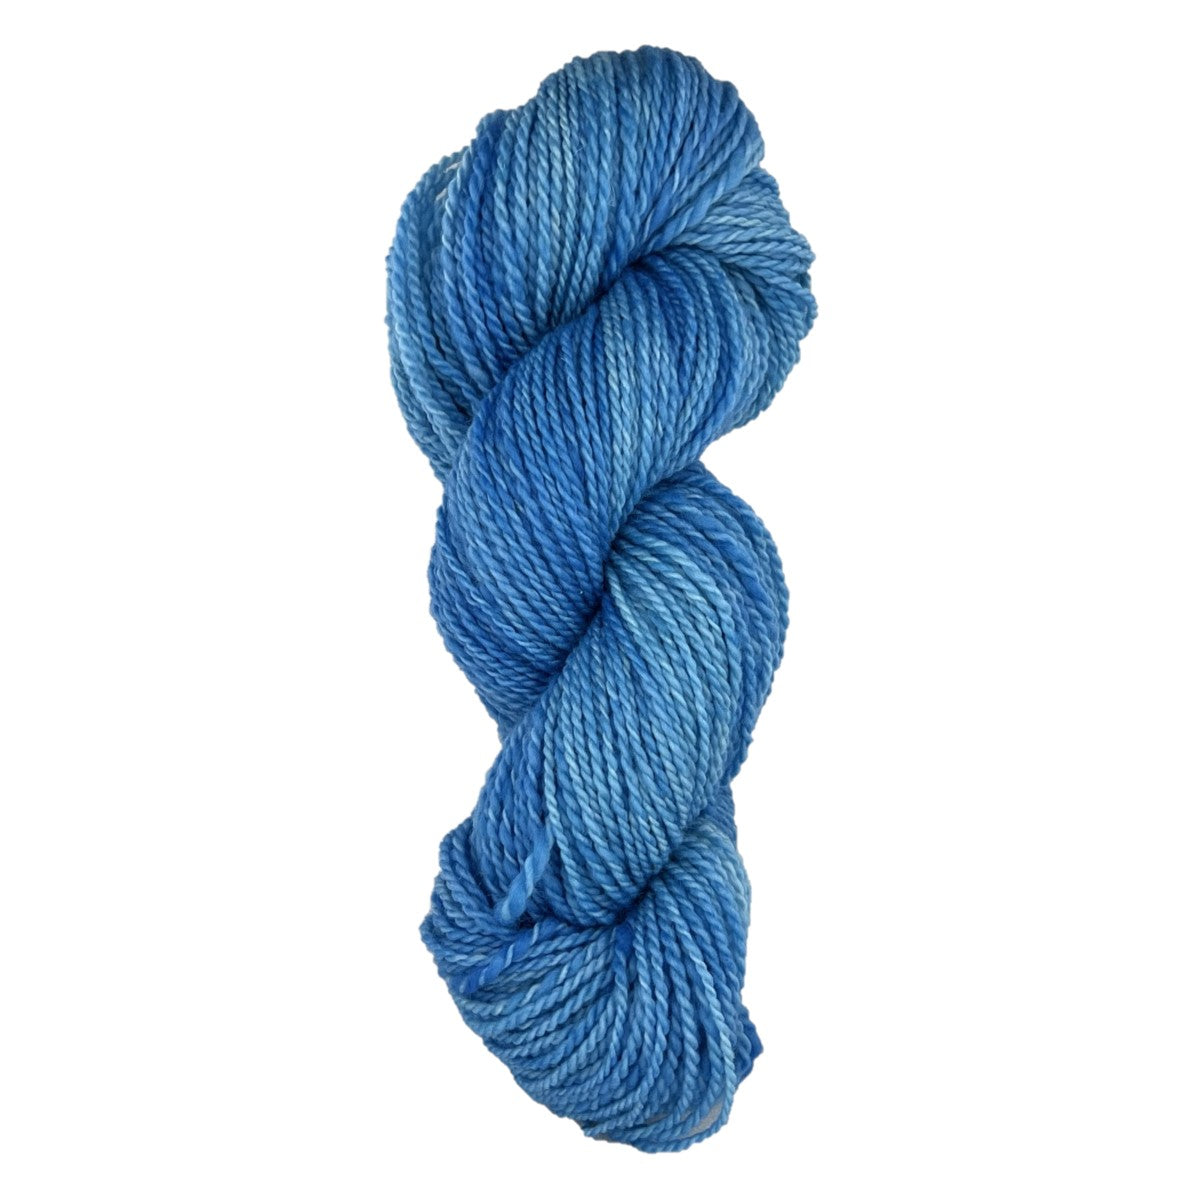 Leviathan Fibres Targhee Heavy Worsted